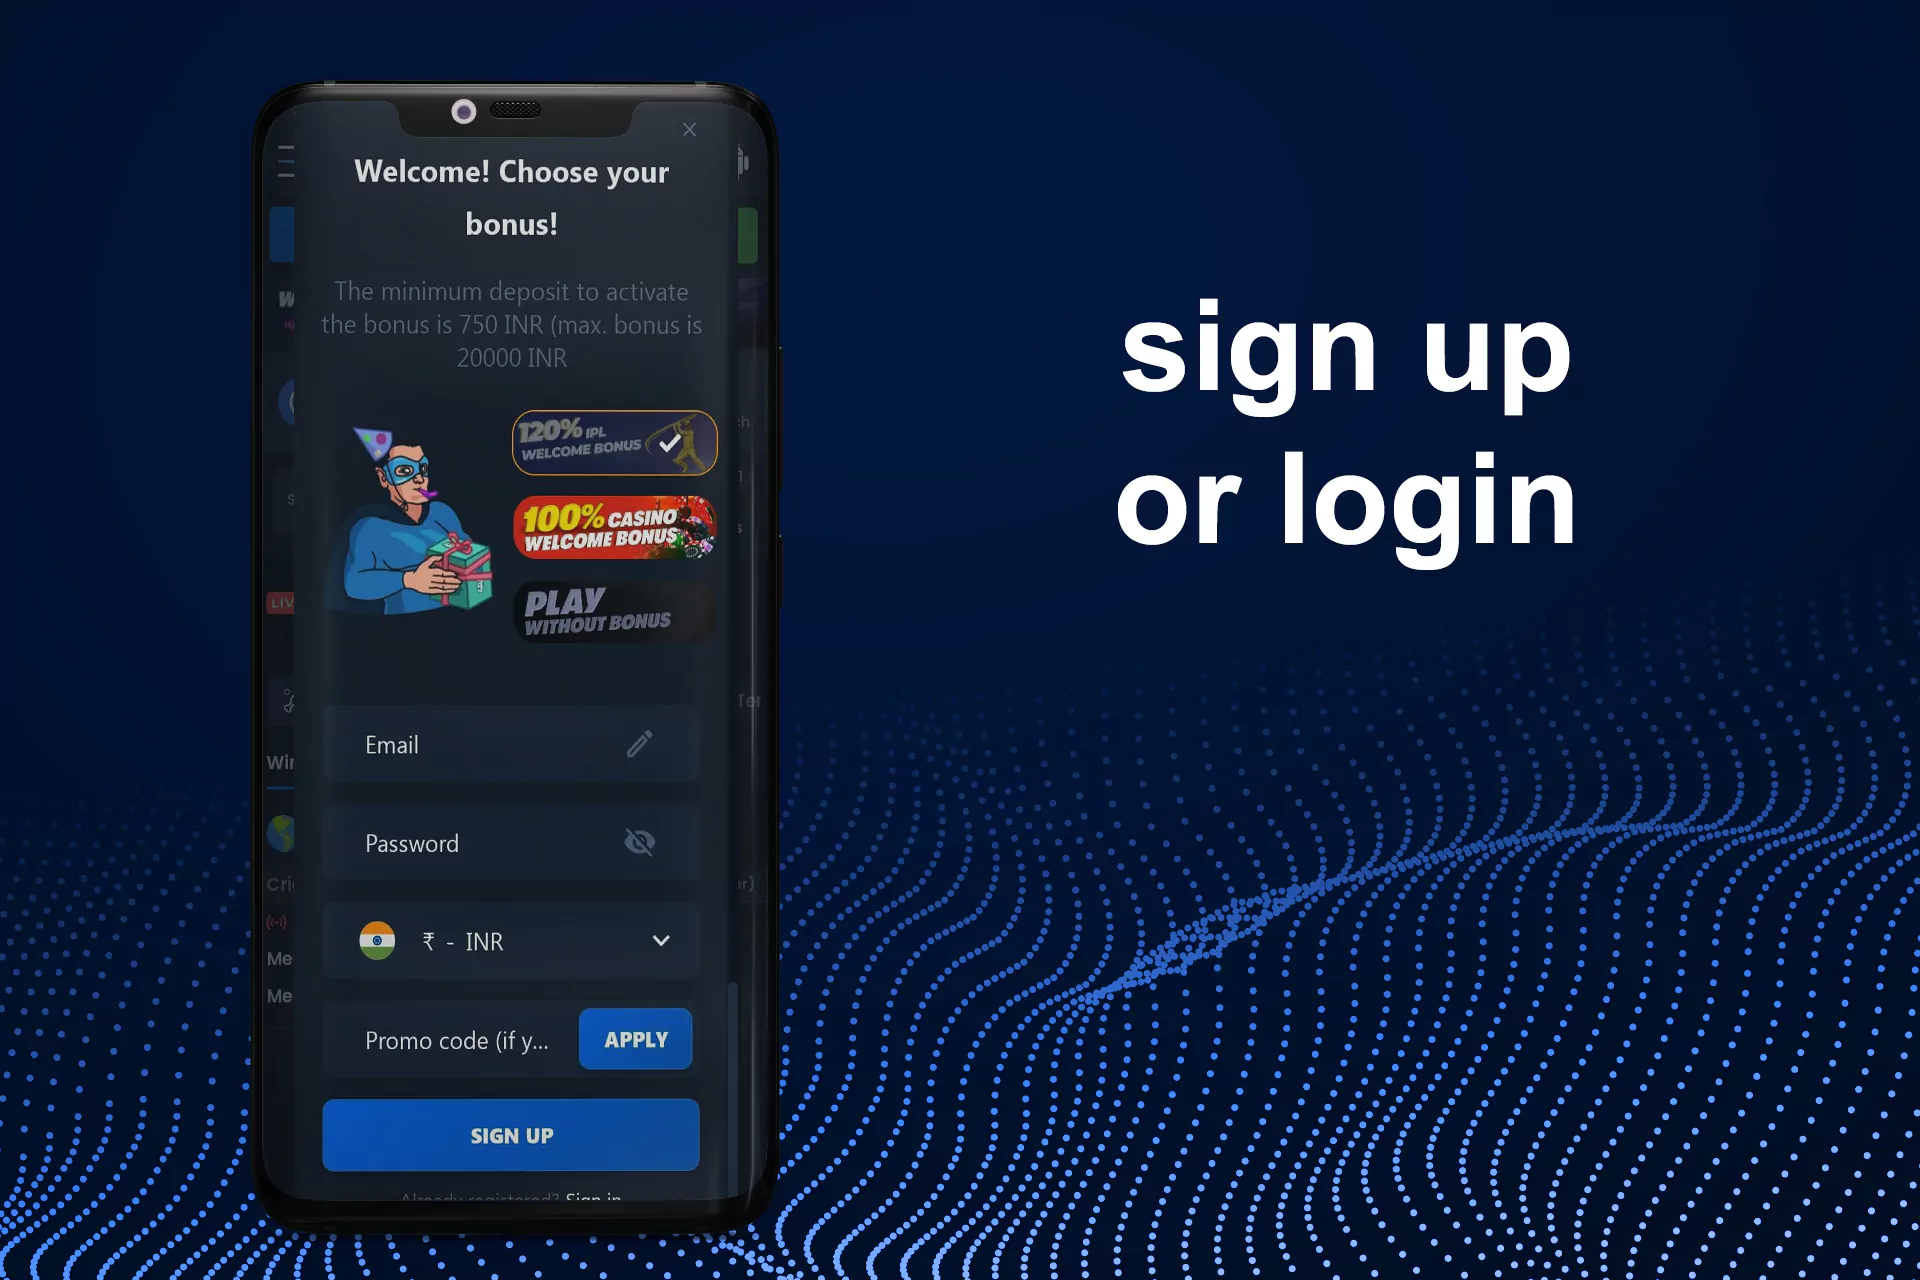 Create a new account or login if you already have it.